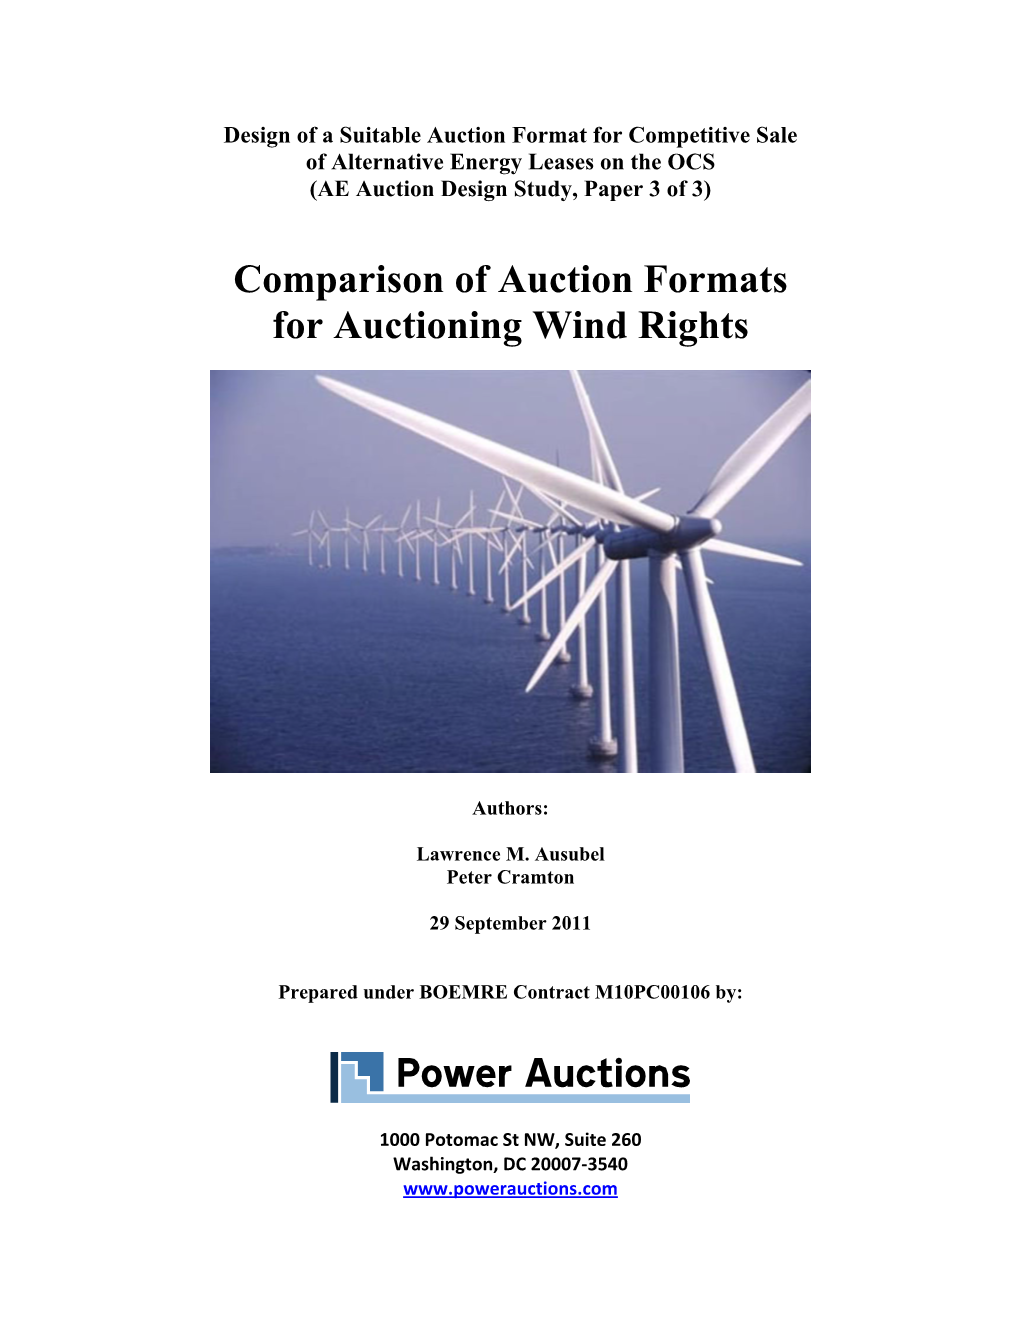 Comparison of Auction Formats for Auctioning Wind Rights